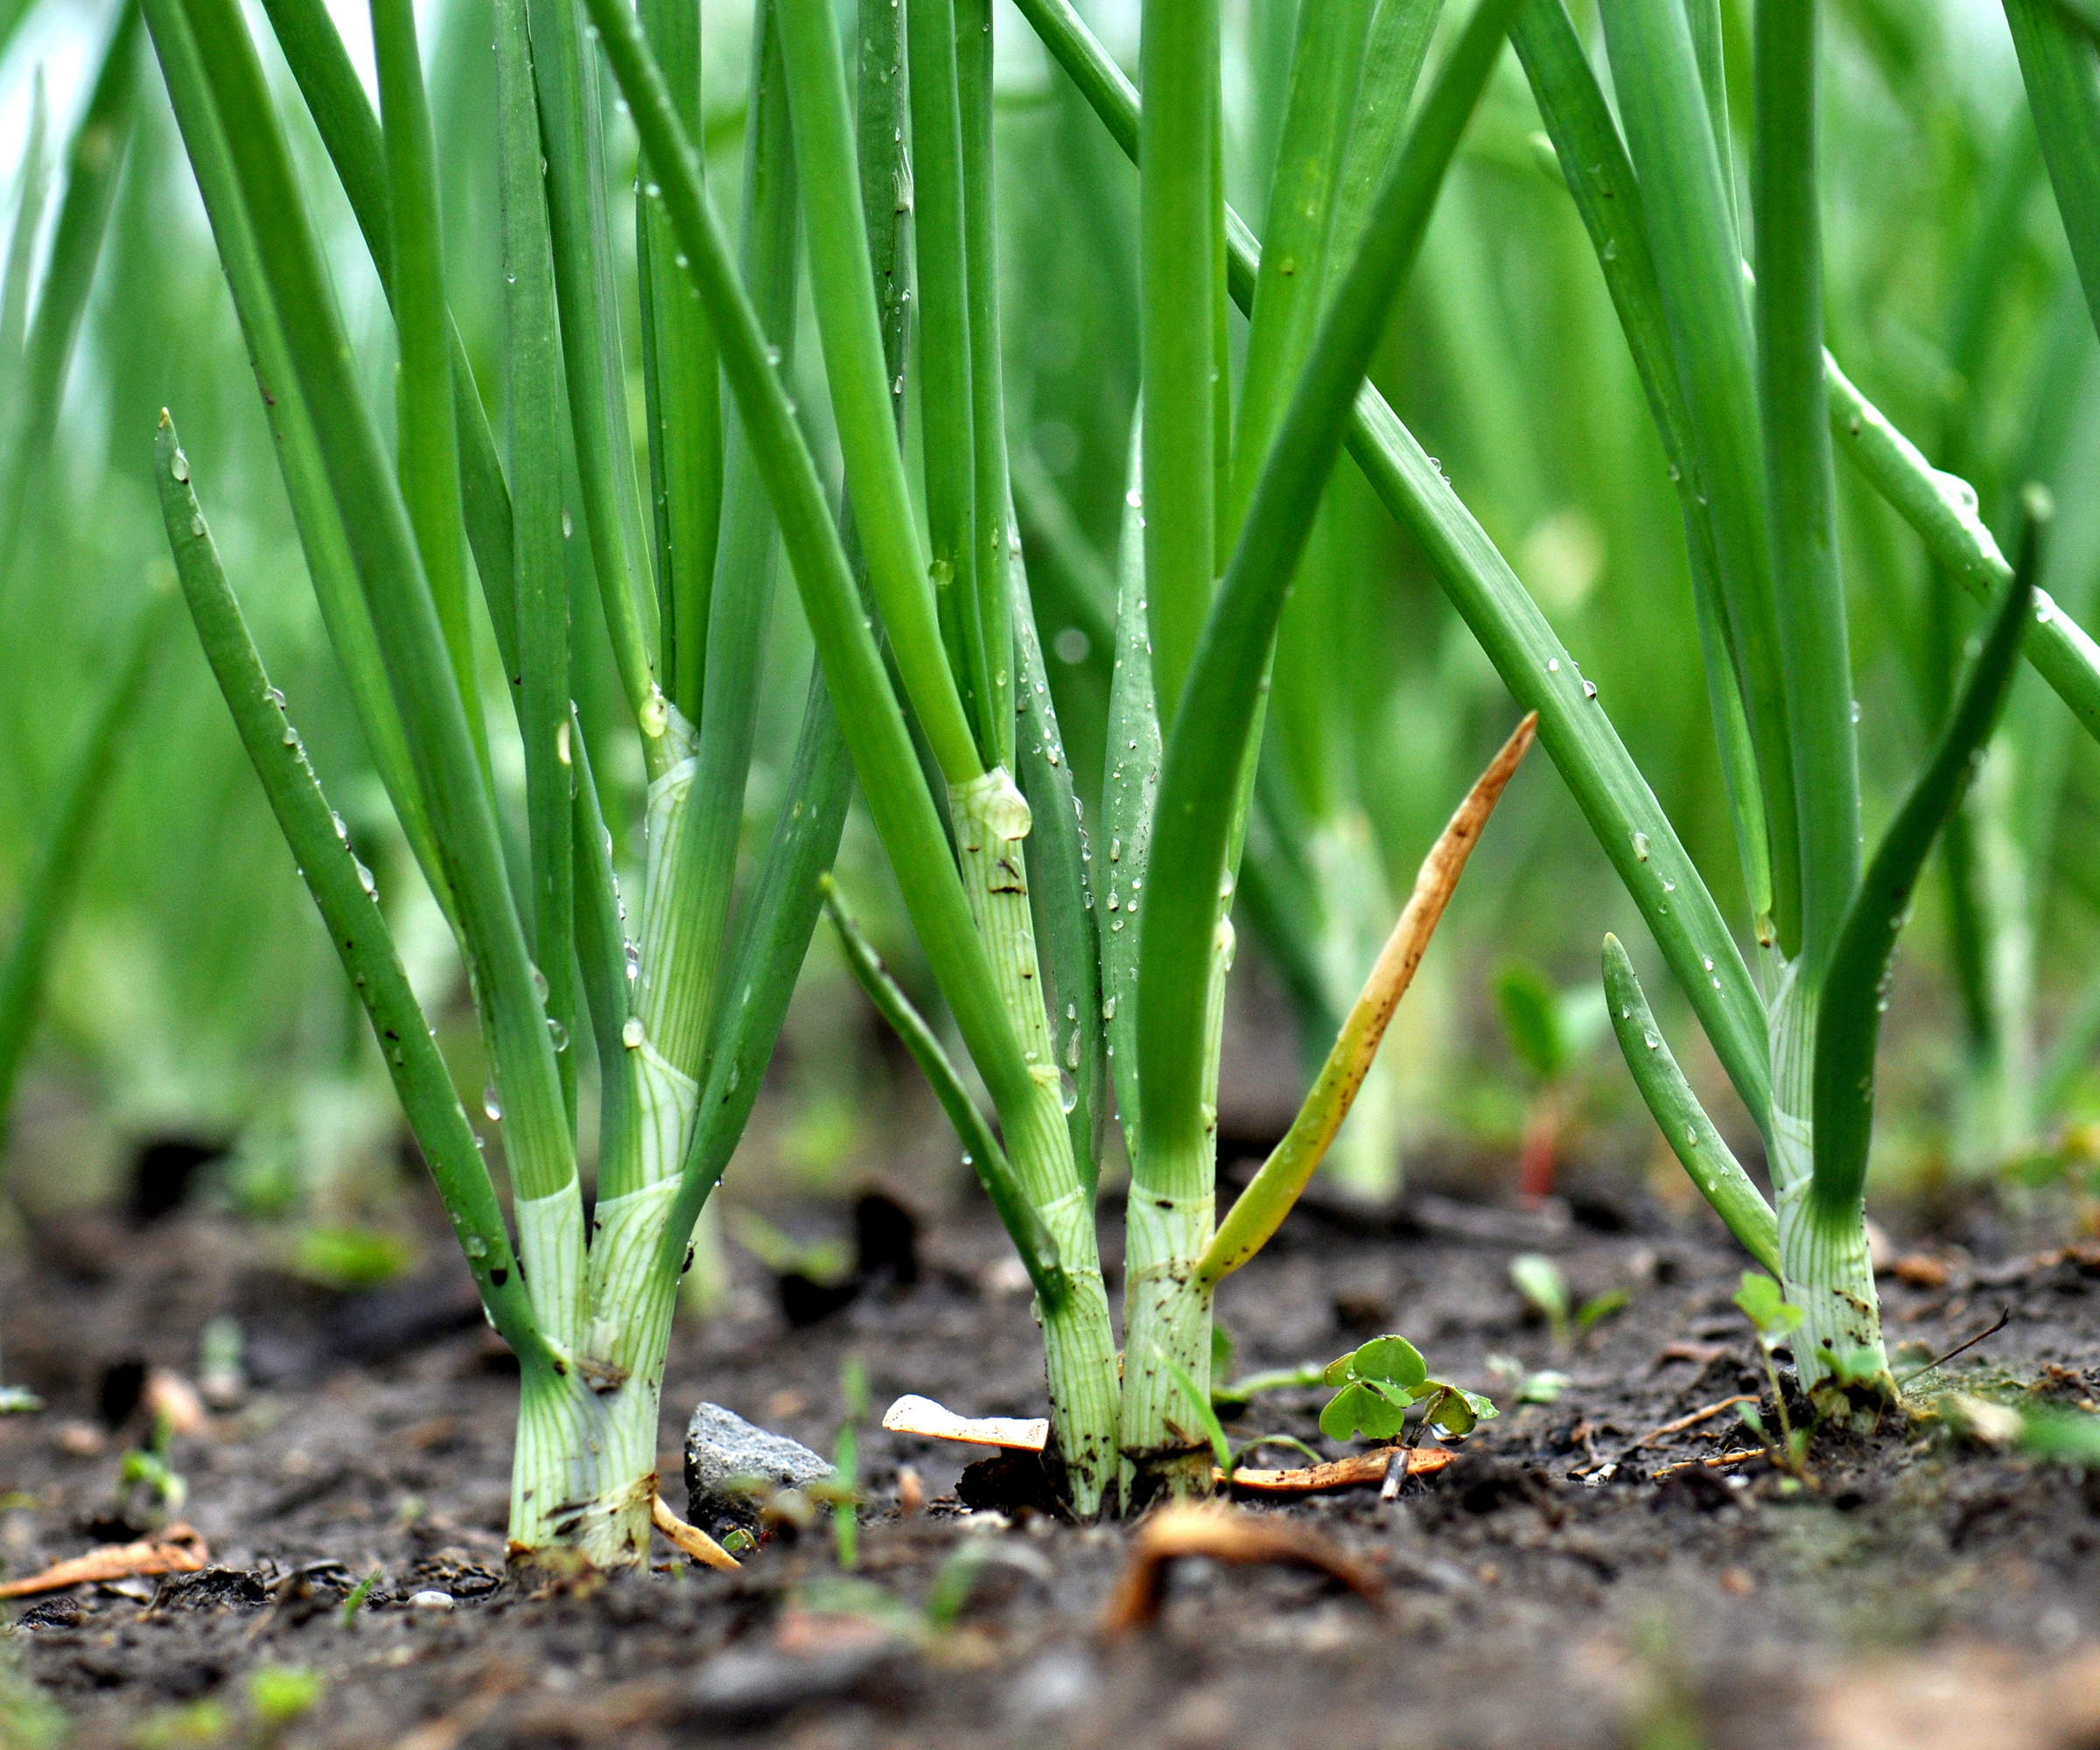 Spring onions growing in the vegetable garden